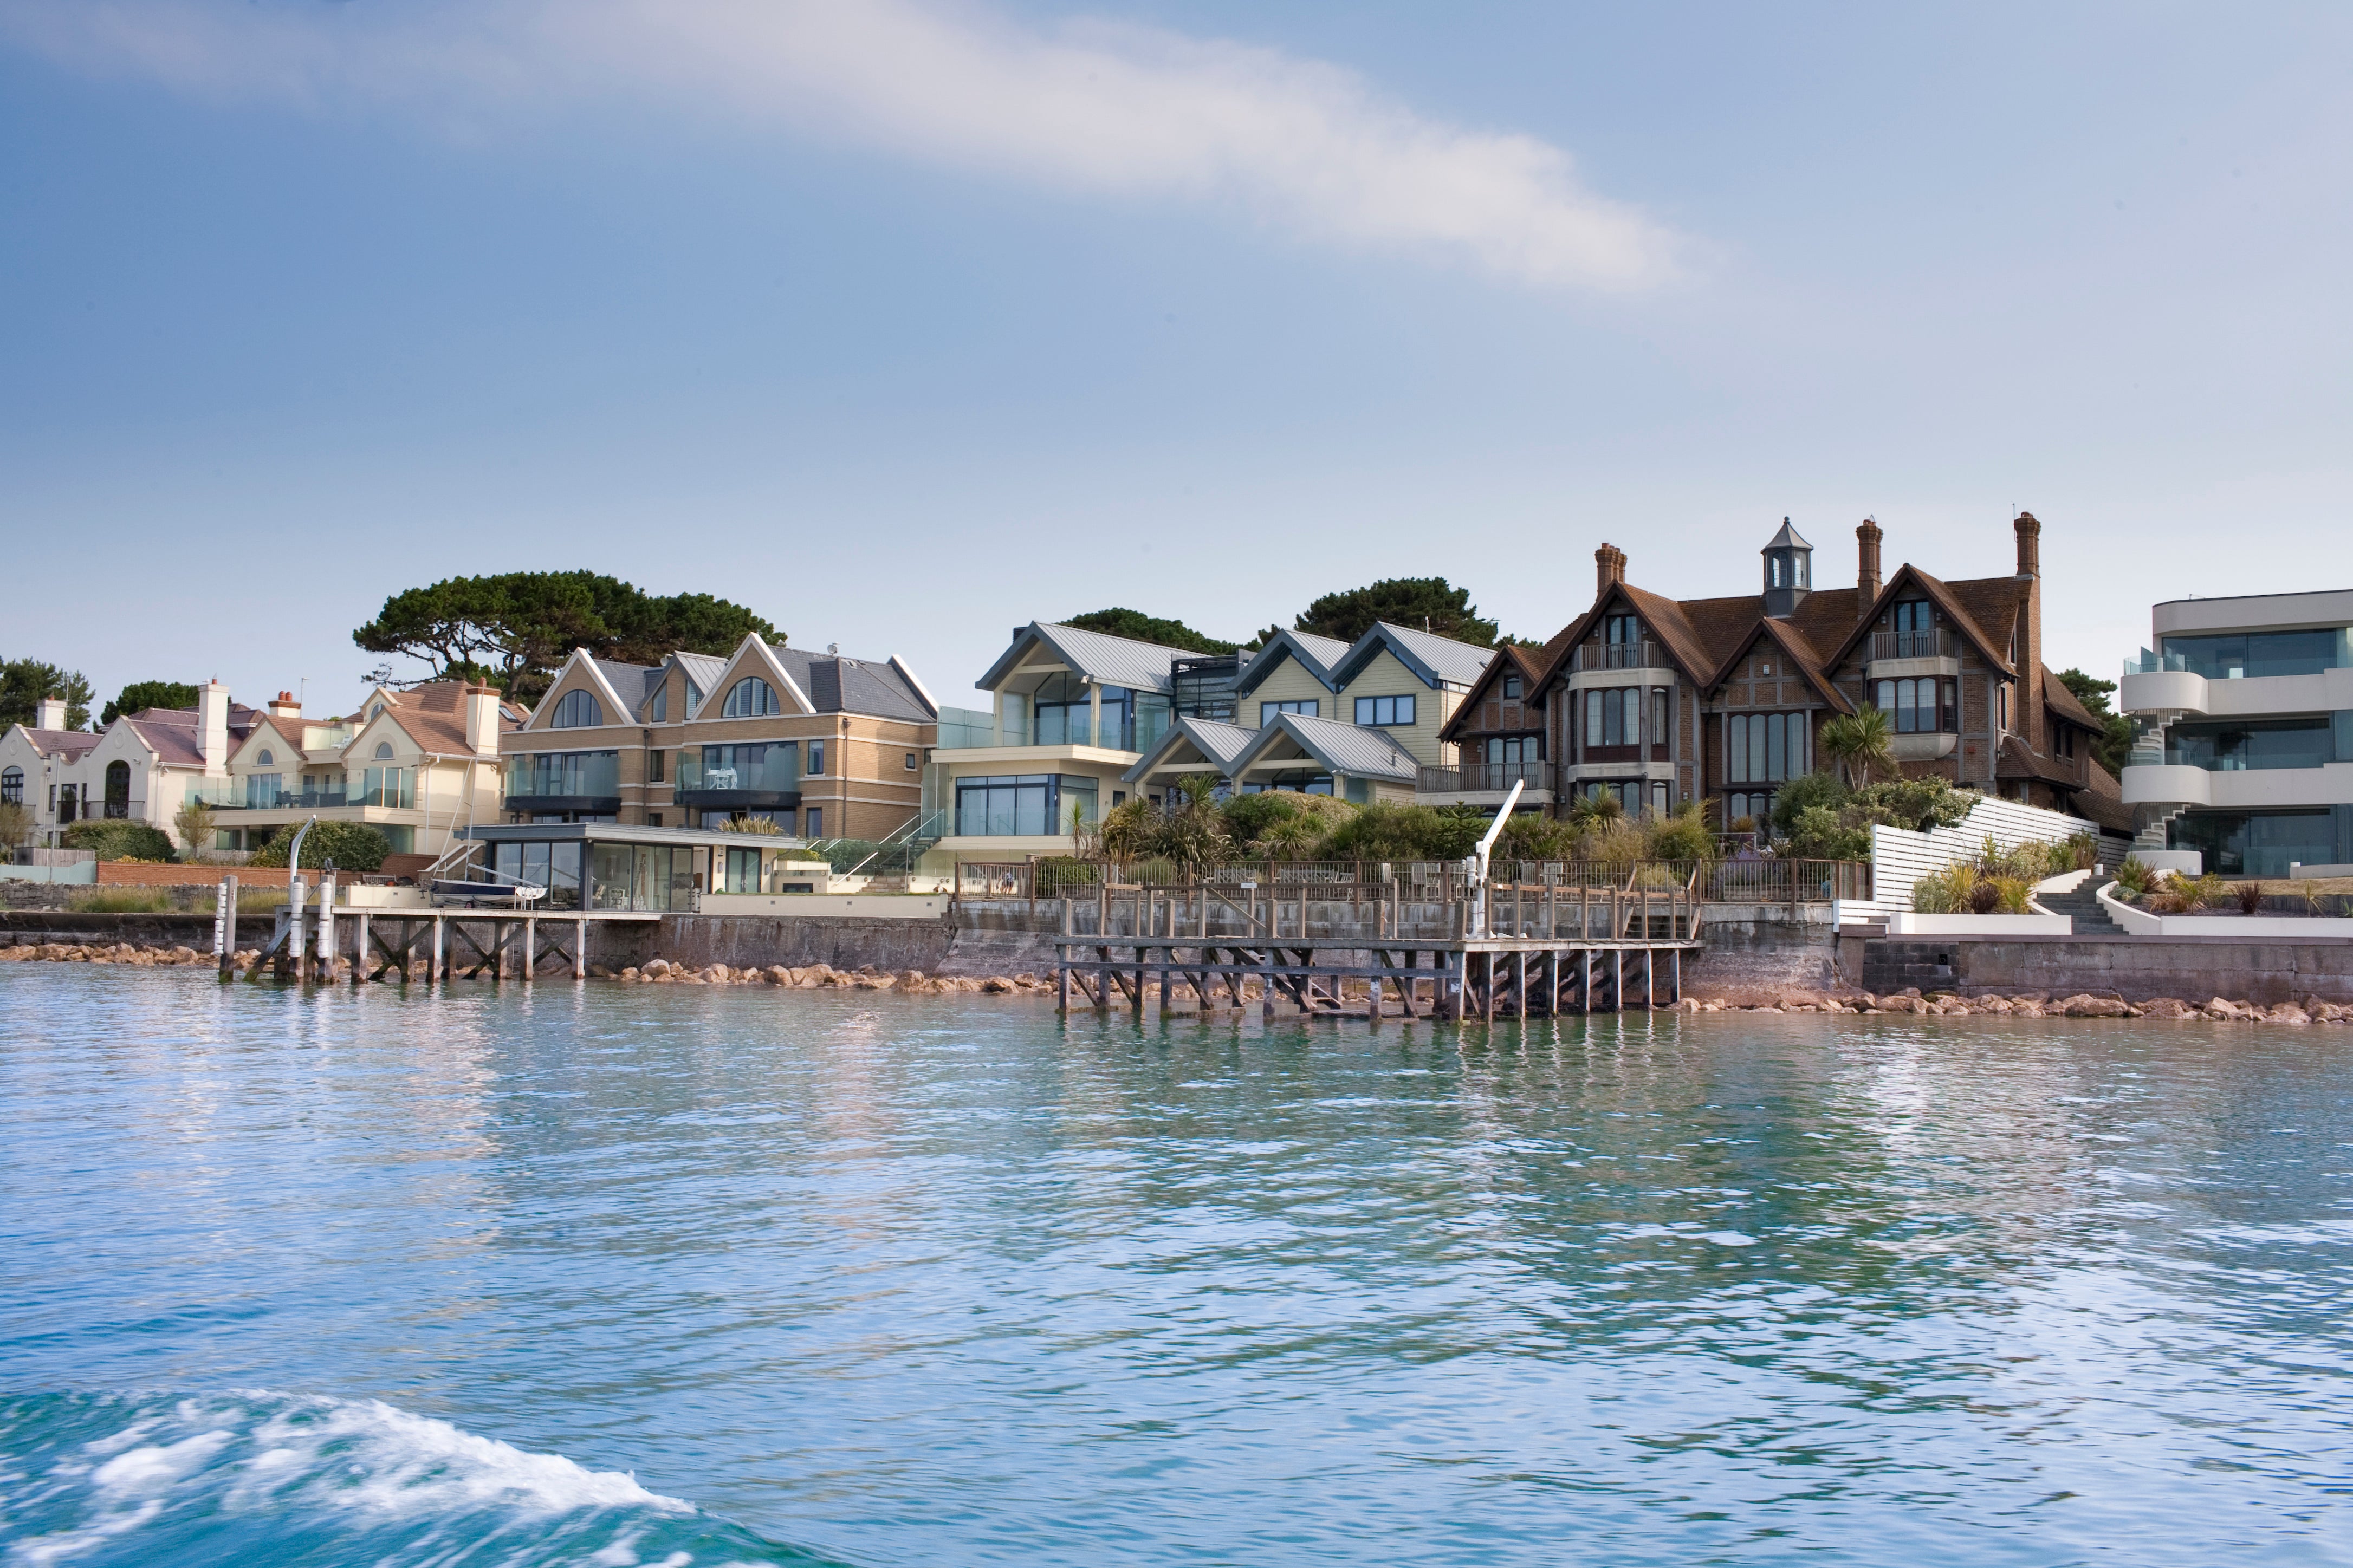 Sandbanks, an affluent town in Dorset, saw an increase of 22 per cent is asking house price last year, ranking third on Rightmove’s list